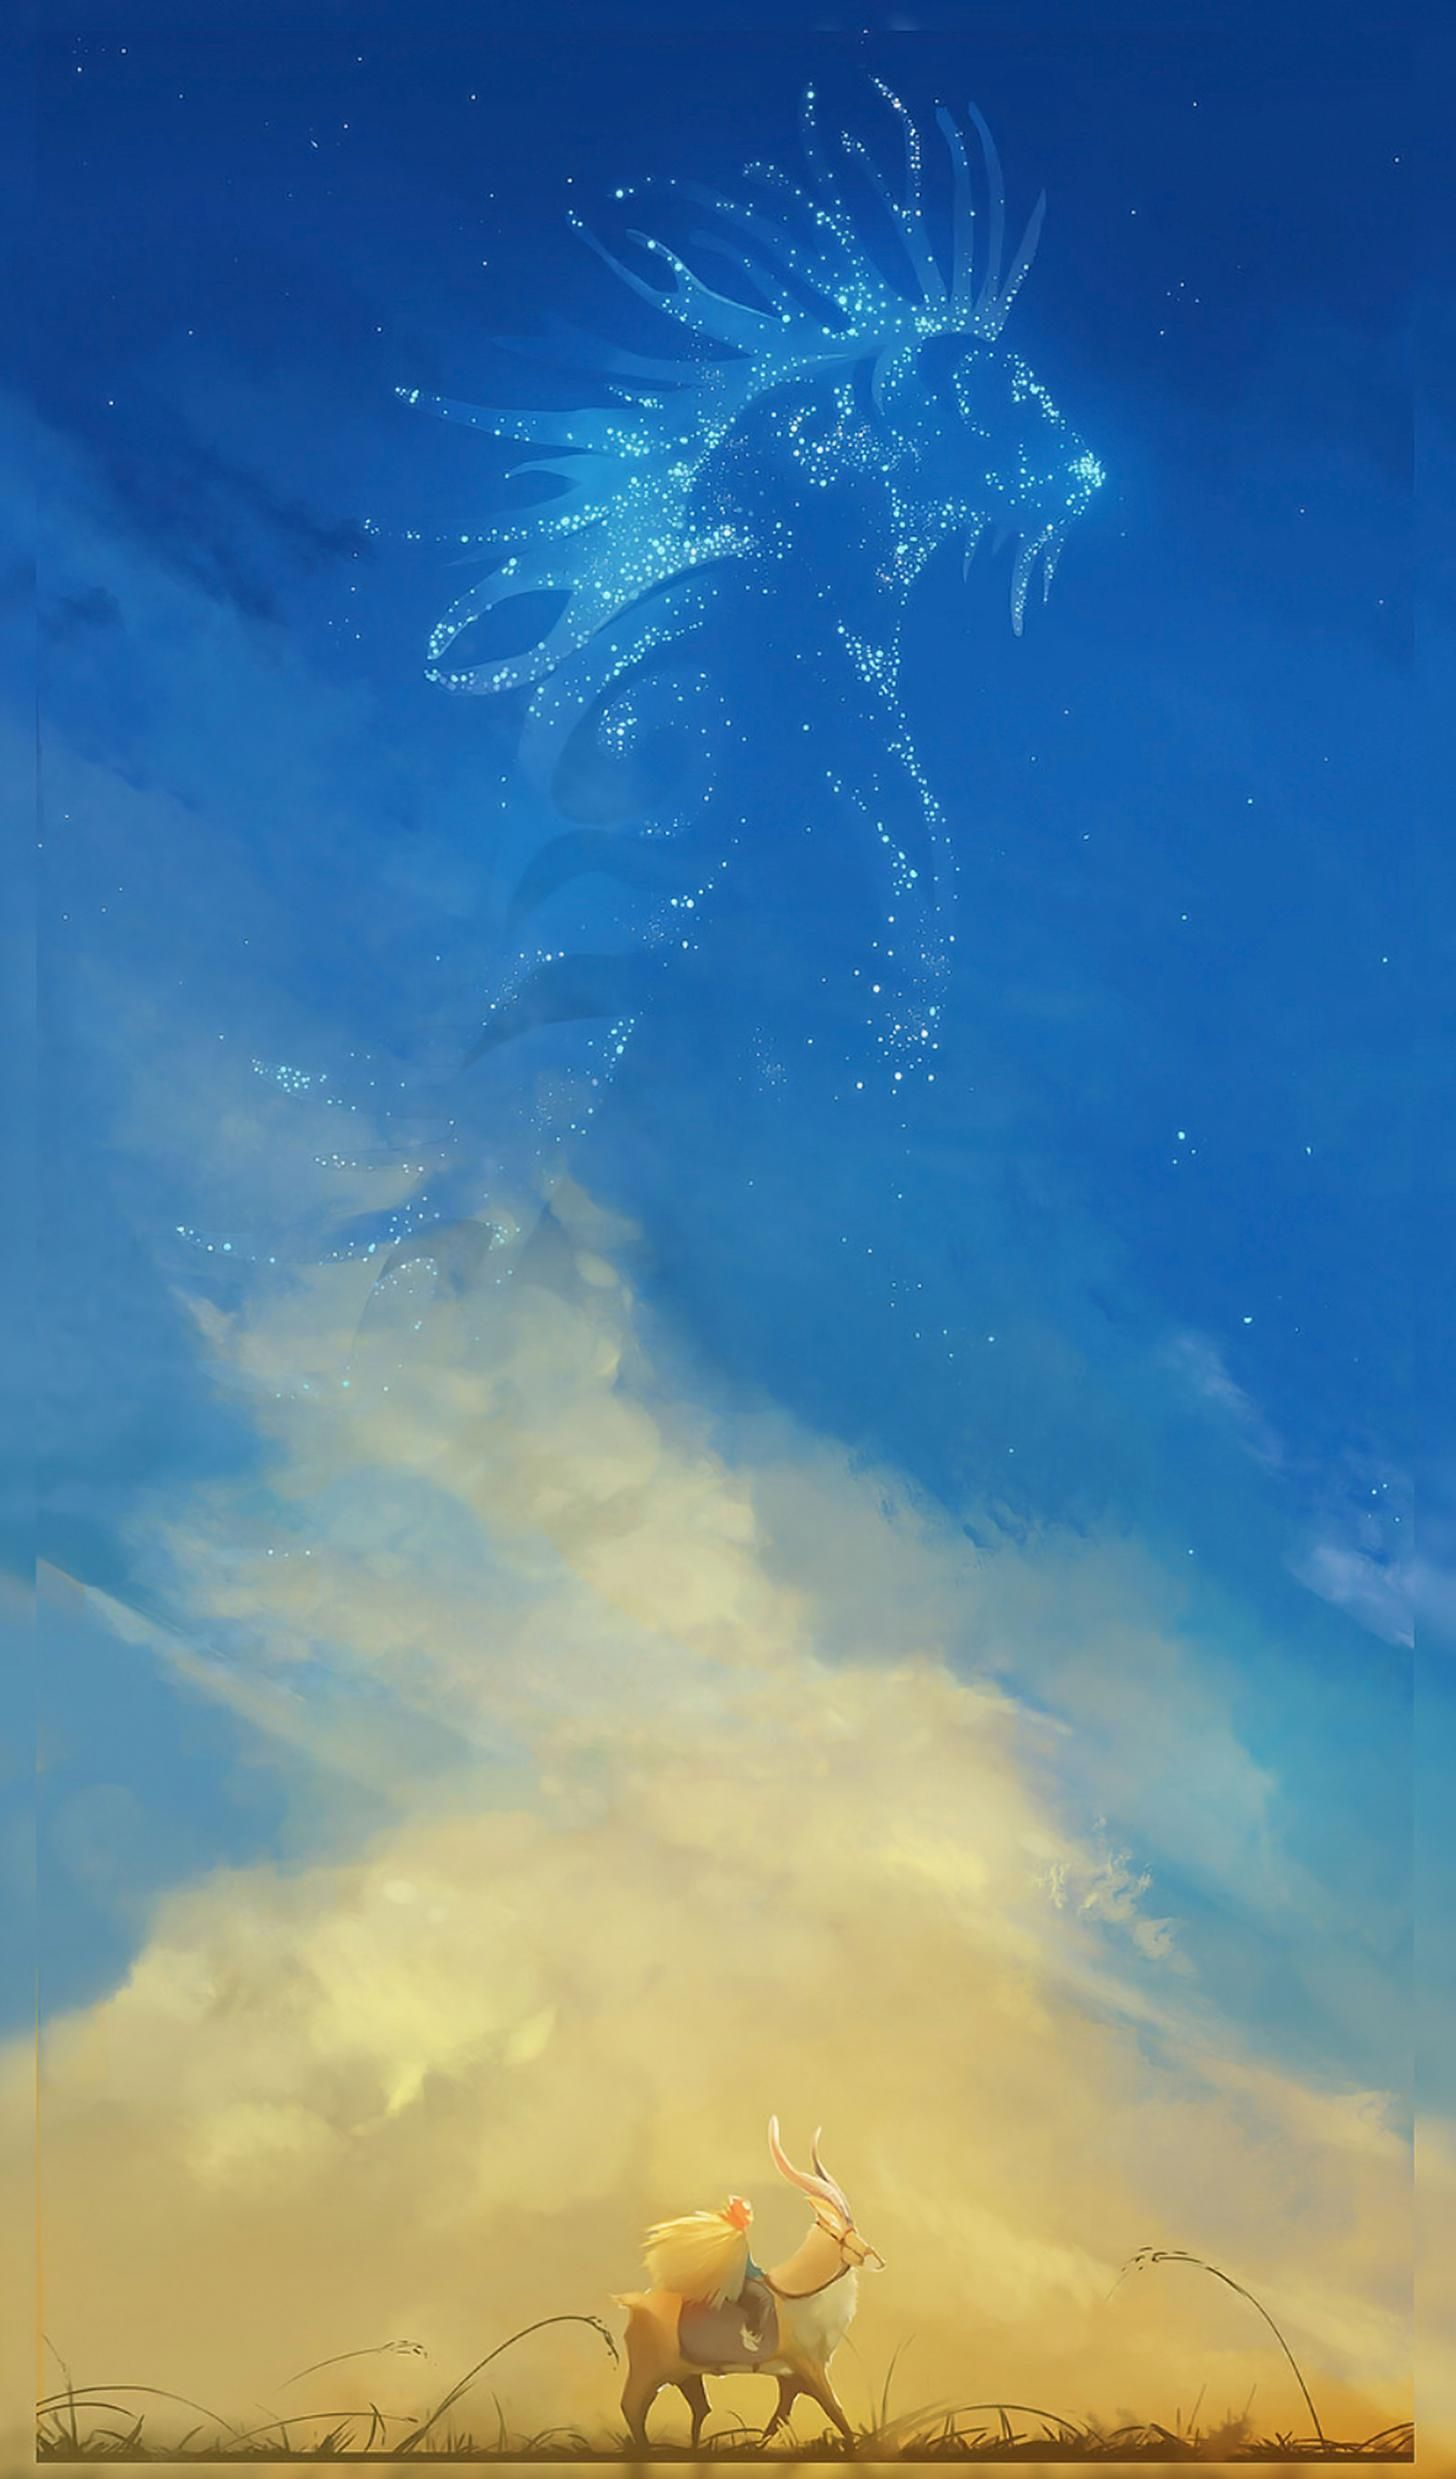 1456x2479 Studio Ghibli mobile wallpapers without text Album on Imgur | Studio ghibli art, Studio ghibli movies, Ghibli artwork